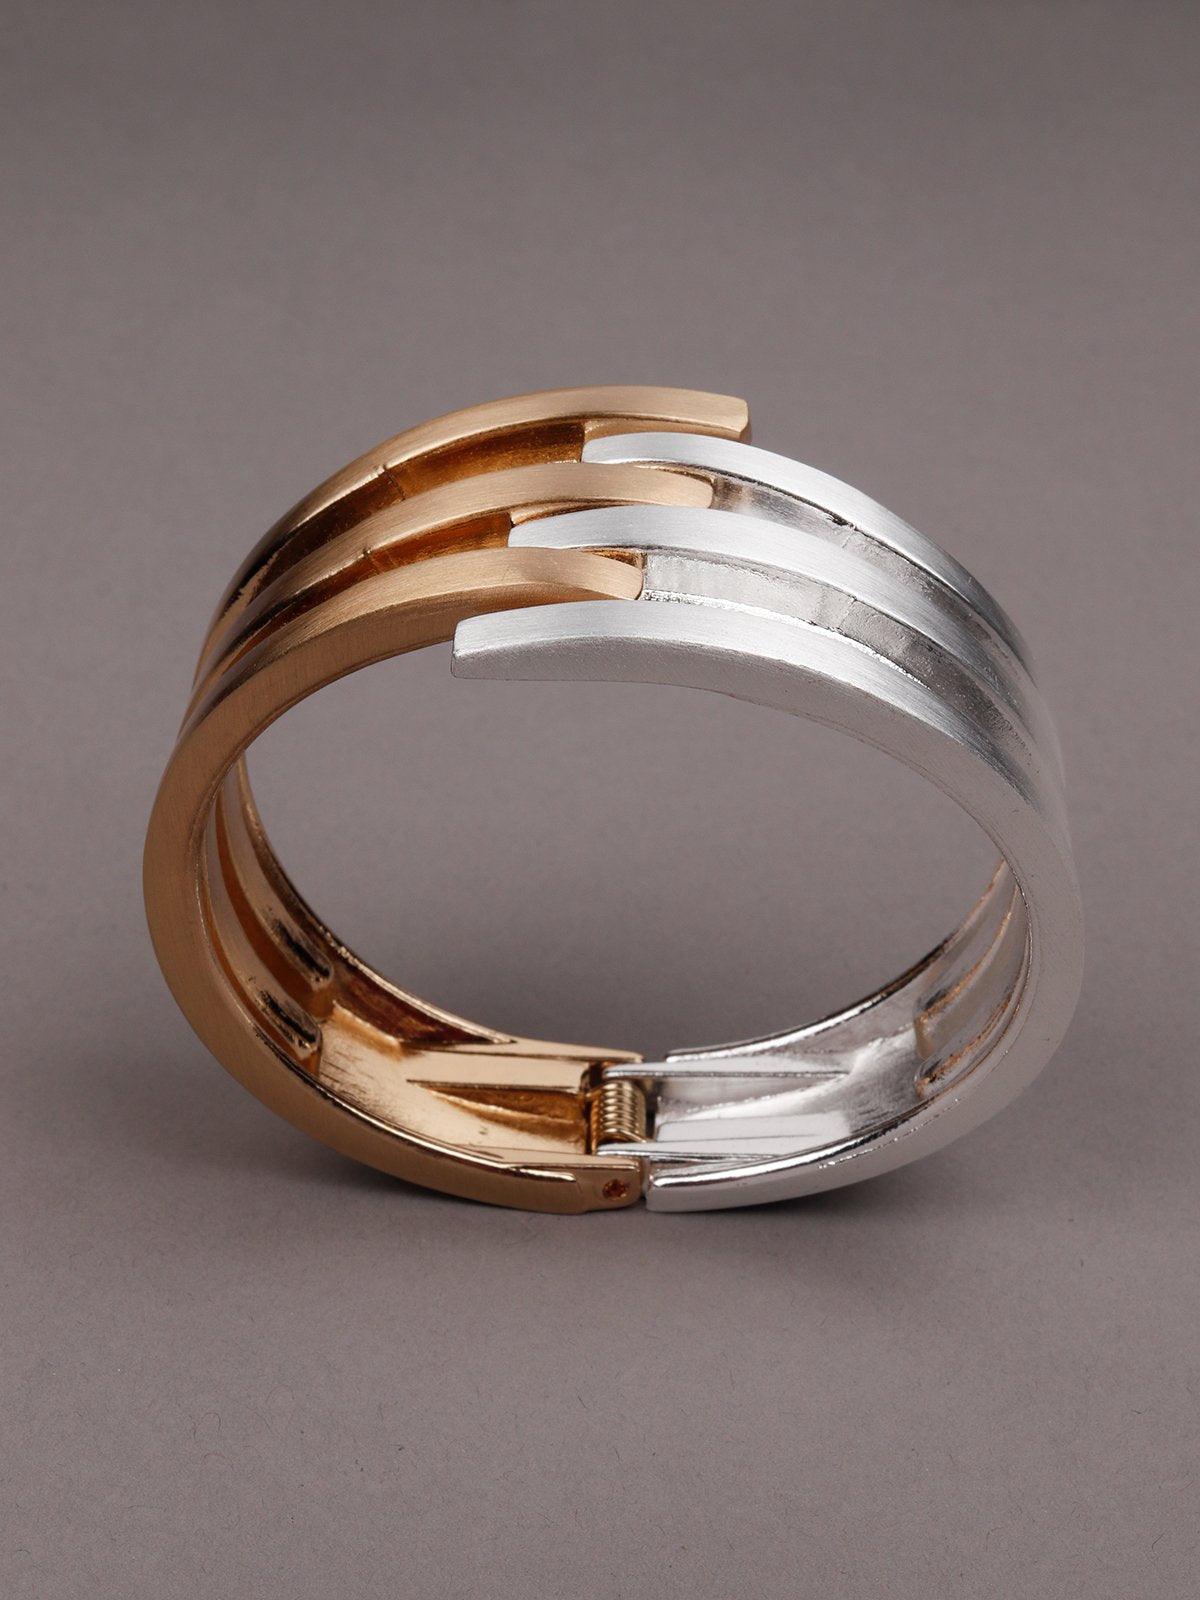 Women's Dual Coloured Gold And Stunning Silver Bracelet - Odette